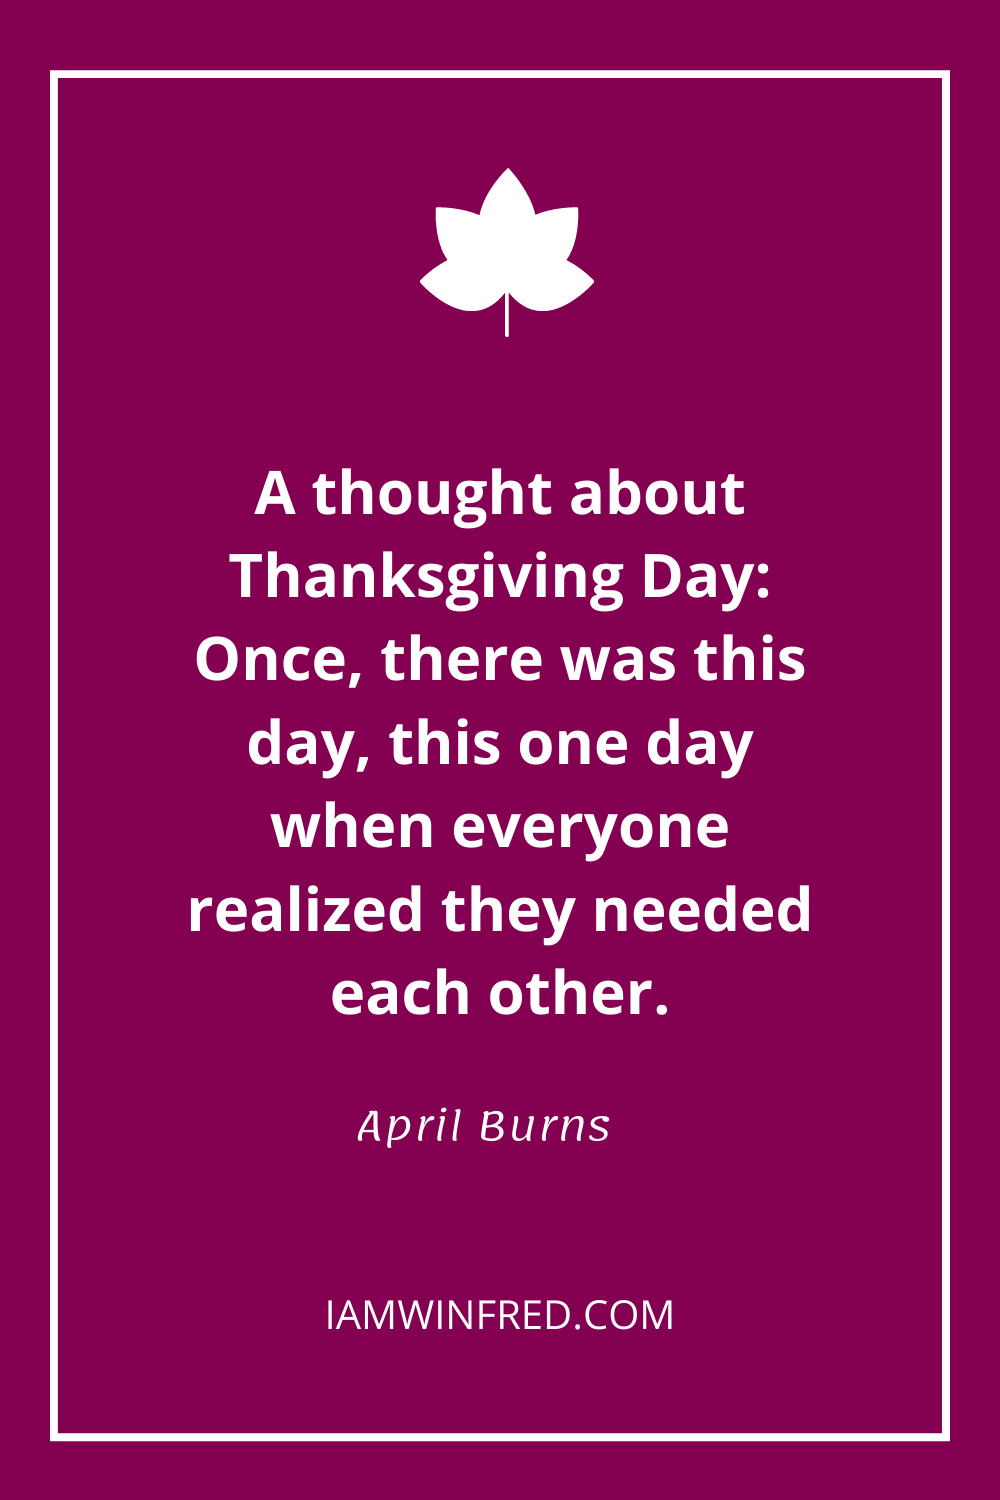 A Thought About Thanksgiving Day Once There Was This Day This One Day When Everyone Realized They Needed Each Other.